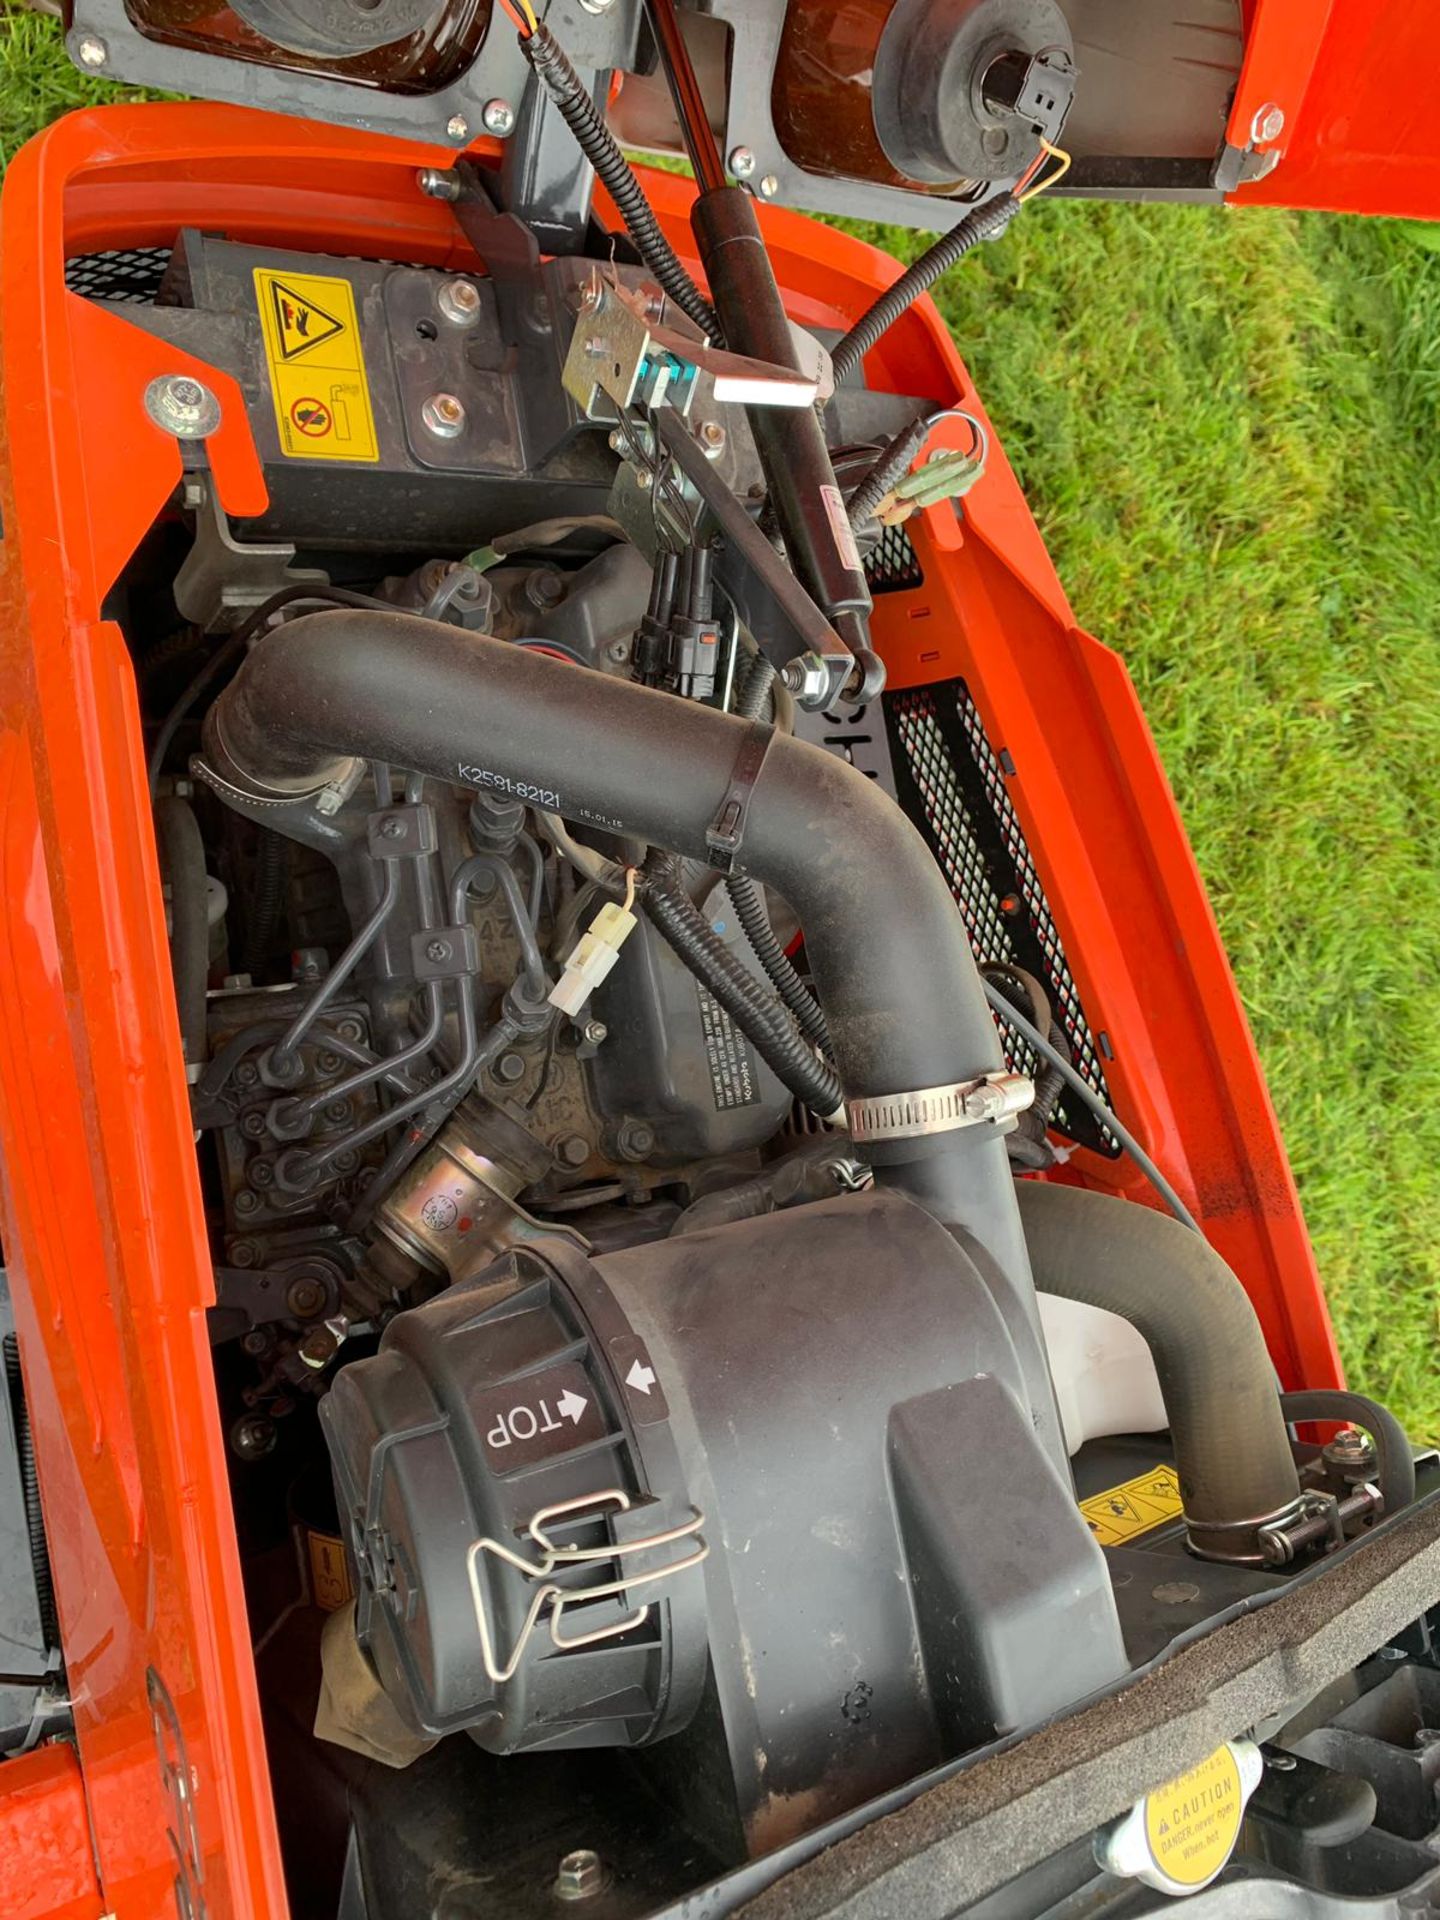 2015 KUBOTA G23-II TWIN CUT LAWN MOWER WITH ROLL BAR, HYDRAULIC TIP, LOW DUMP COLLECTOR - 28 HOURS!! - Image 7 of 15